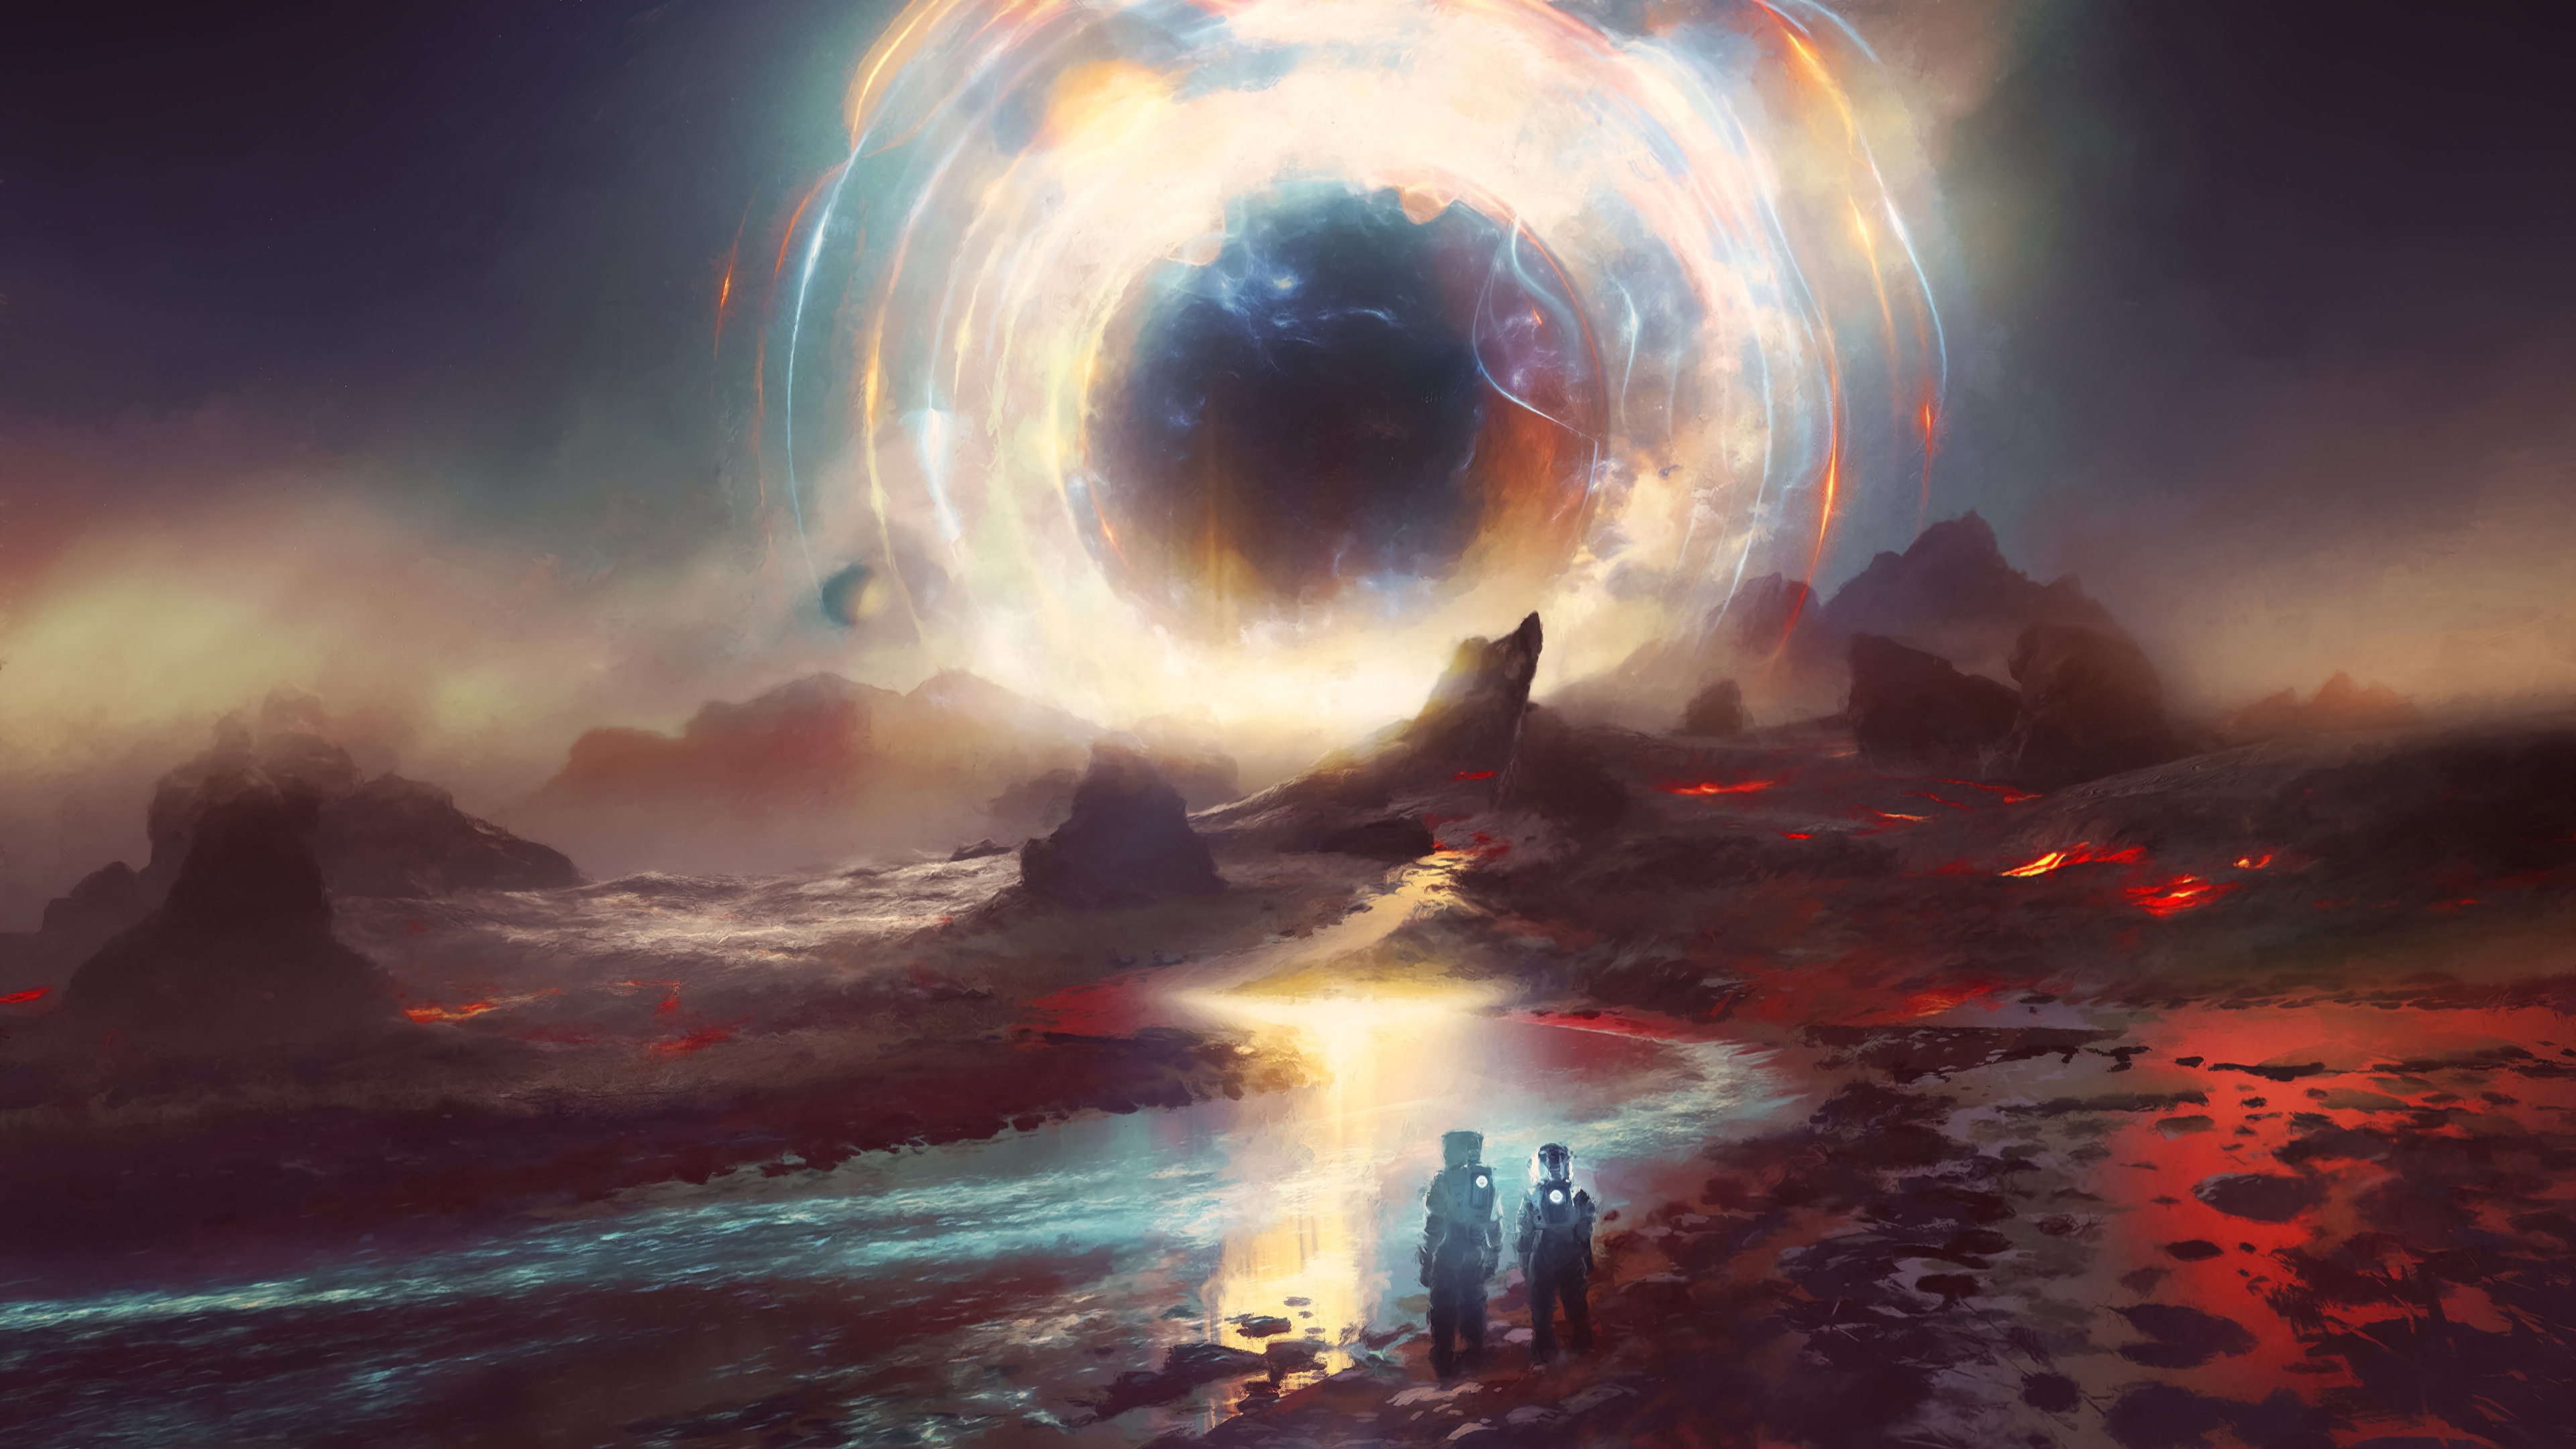 Free photo Futuristic landscape with astronauts on an unknown planet near a black hole